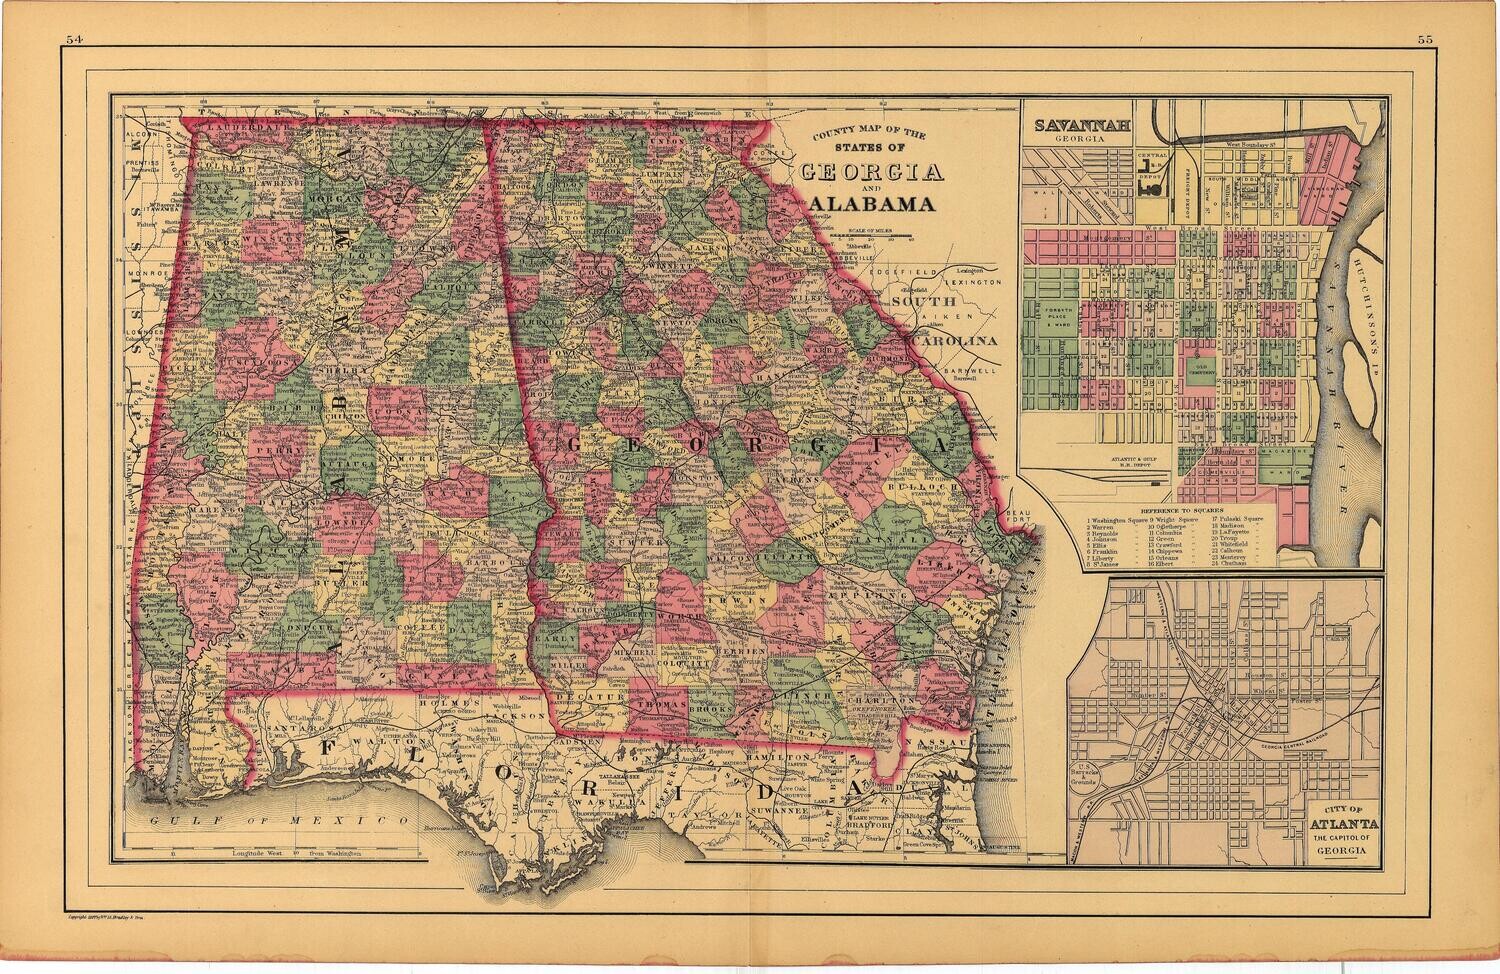 1887 Map of Georgia &amp; Alabama w/ Savannah and Atlanta Inserts by Bradley&#39;s in Lithography